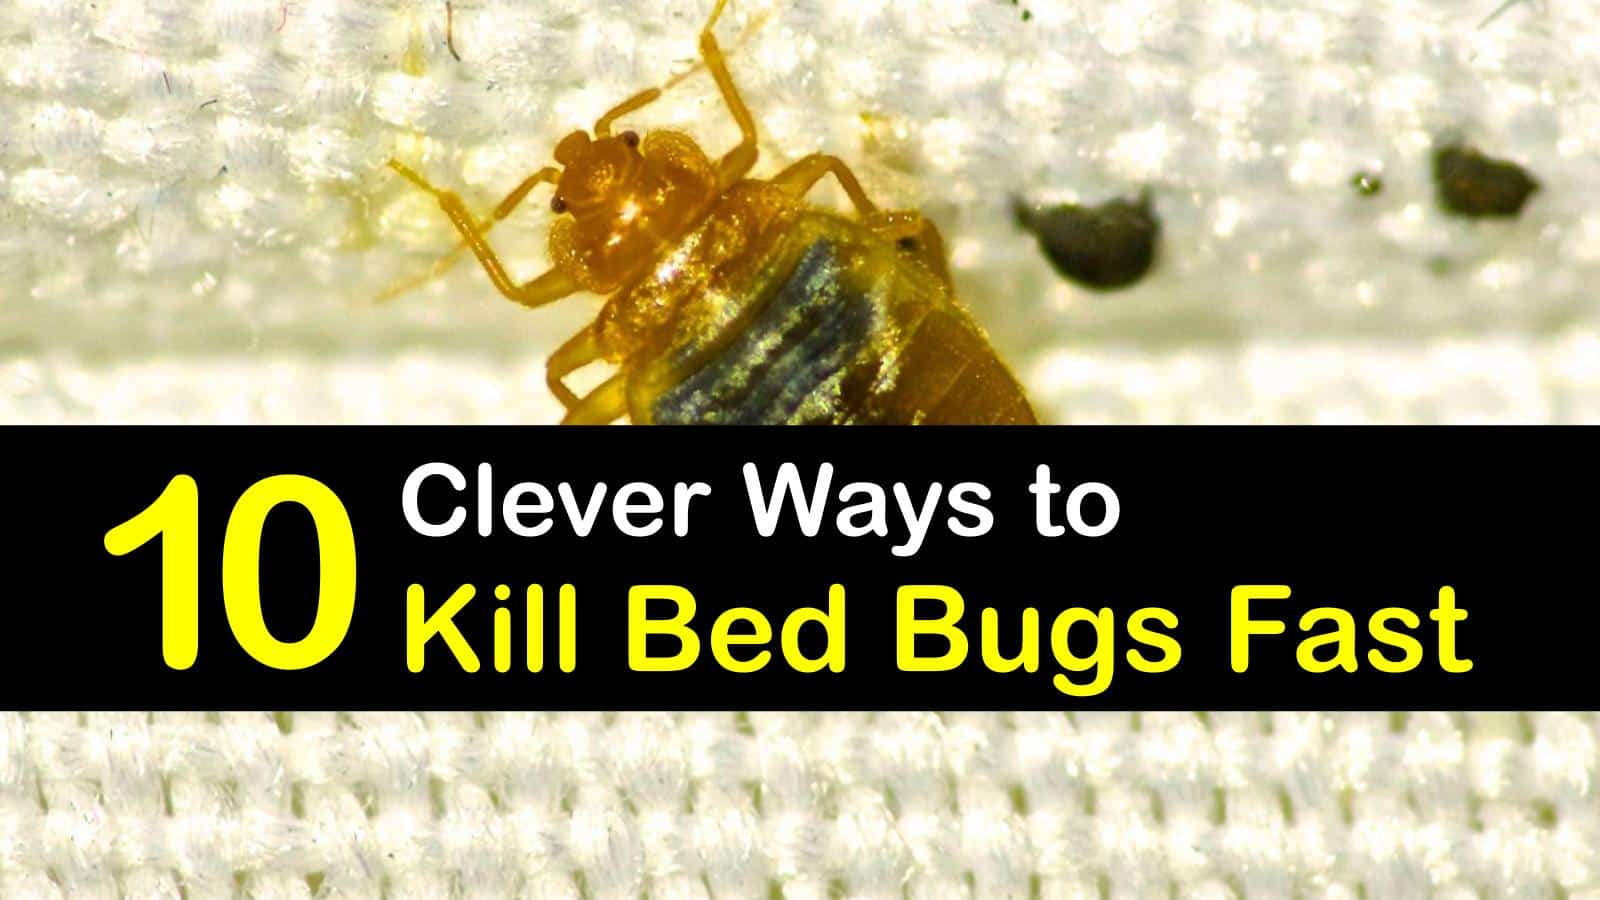 does keeping mattress in sun kill bed bugs